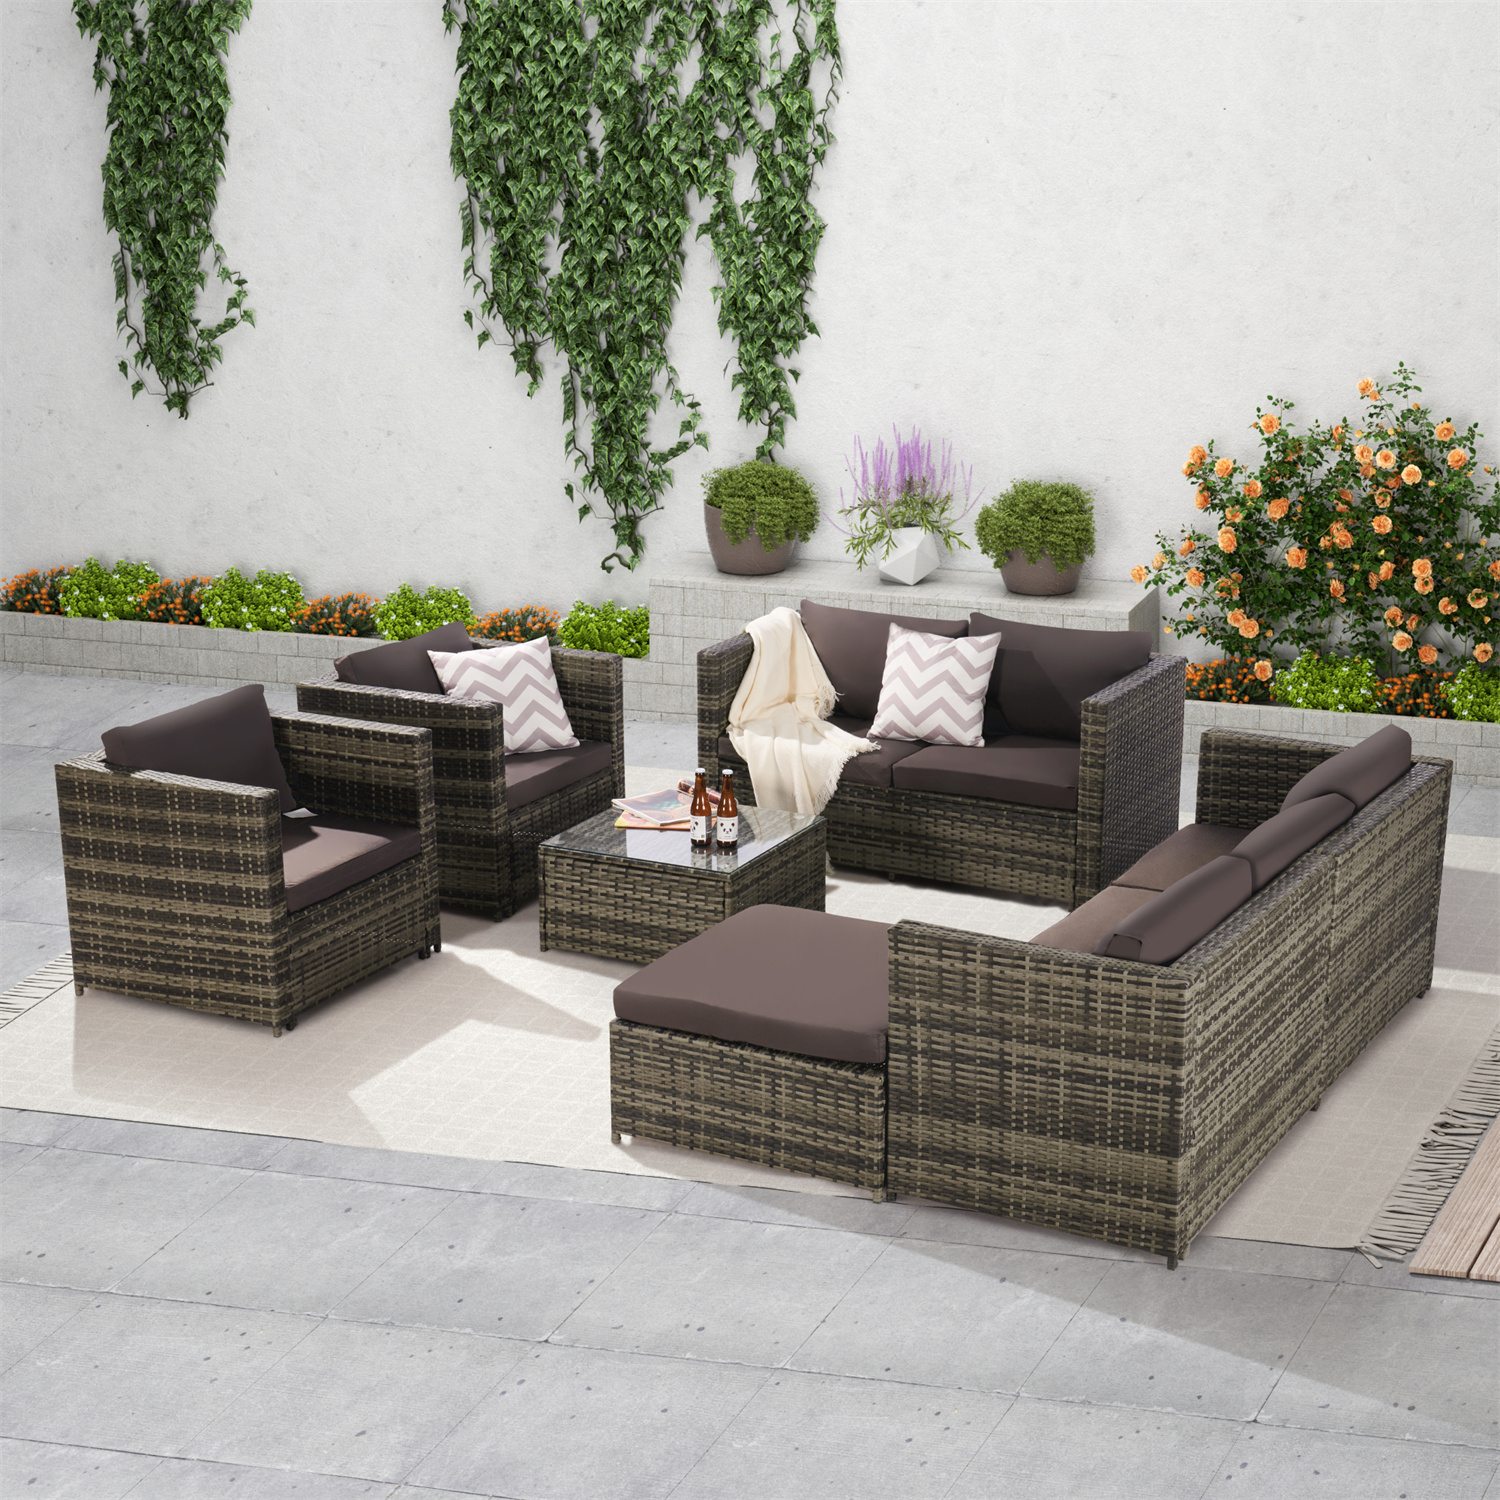 6 Pieces Outdoor Patio Furniture Set, All-Weather Patio Outdoor Conversation Sectional Set with Coffee Table & Ottoman, Wicker Sofas, Black - image 1 of 10